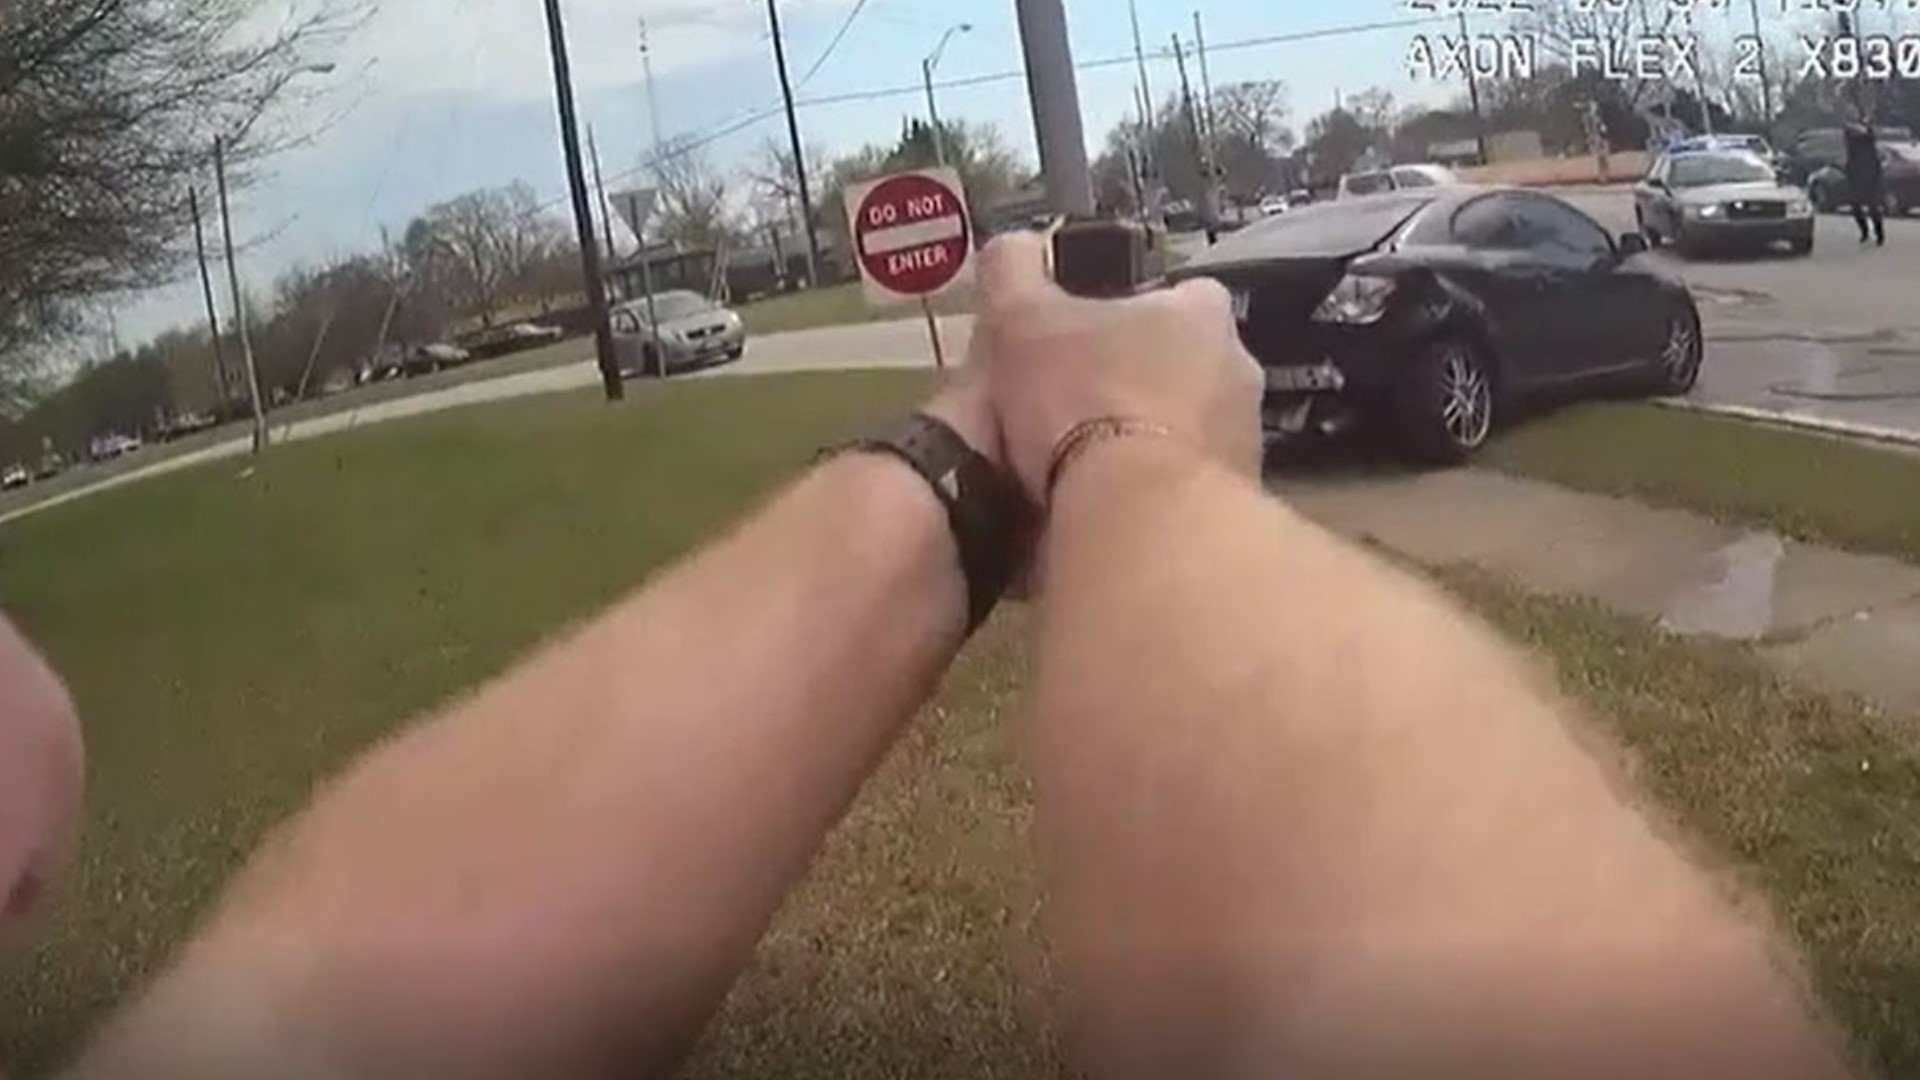 Atlanta Police released bodycam video revealing how law enforcement managed to rescue the 9-year-old and take the suspect into custody.